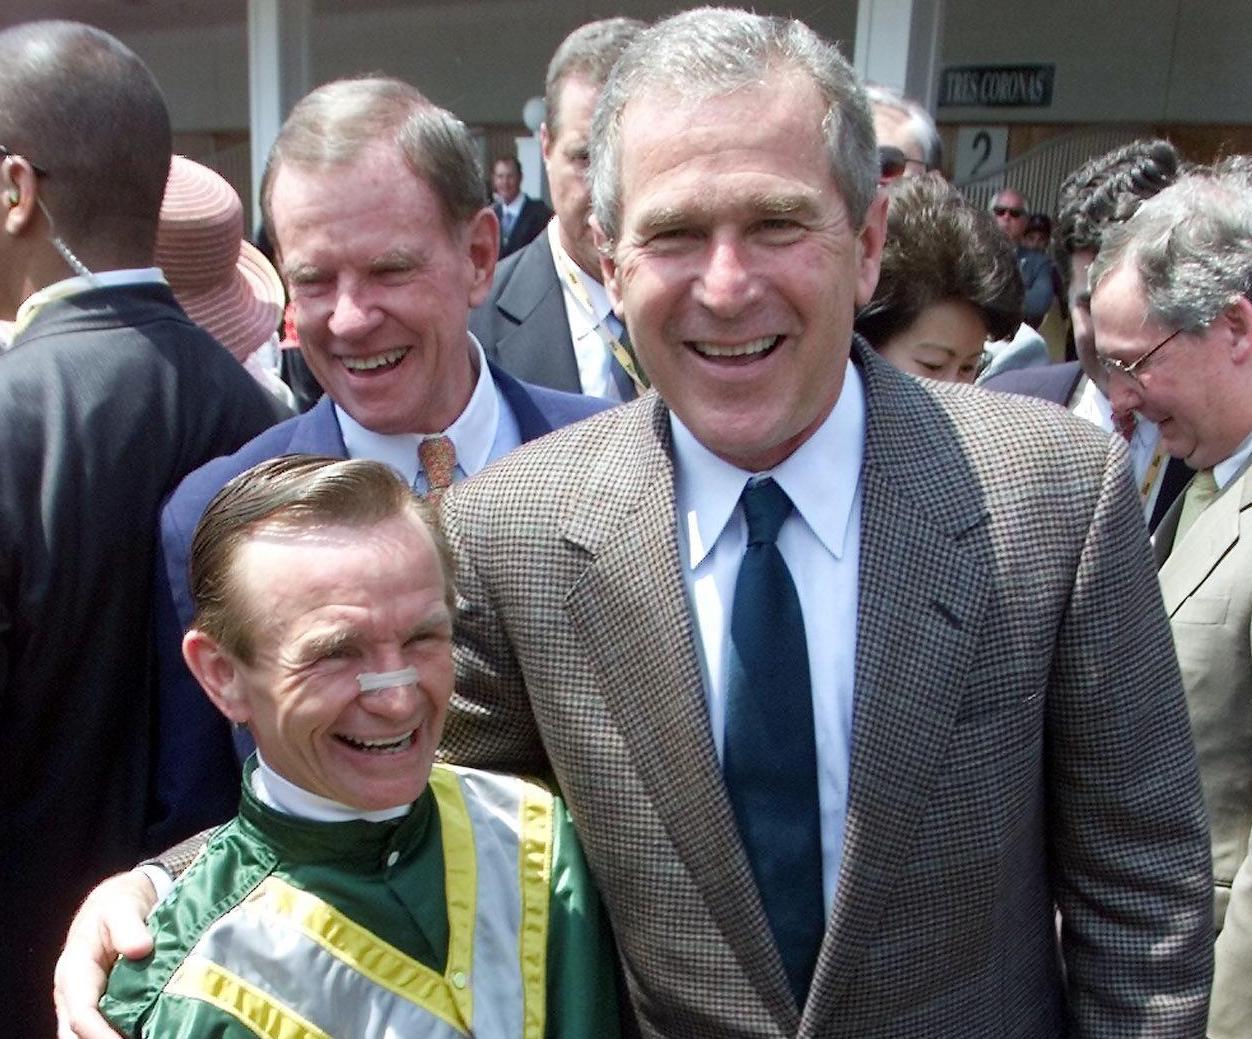 These Are the Presidents Who Attended Horse Races Such as the Kentucky Derby (and How Donald Trump Compares)